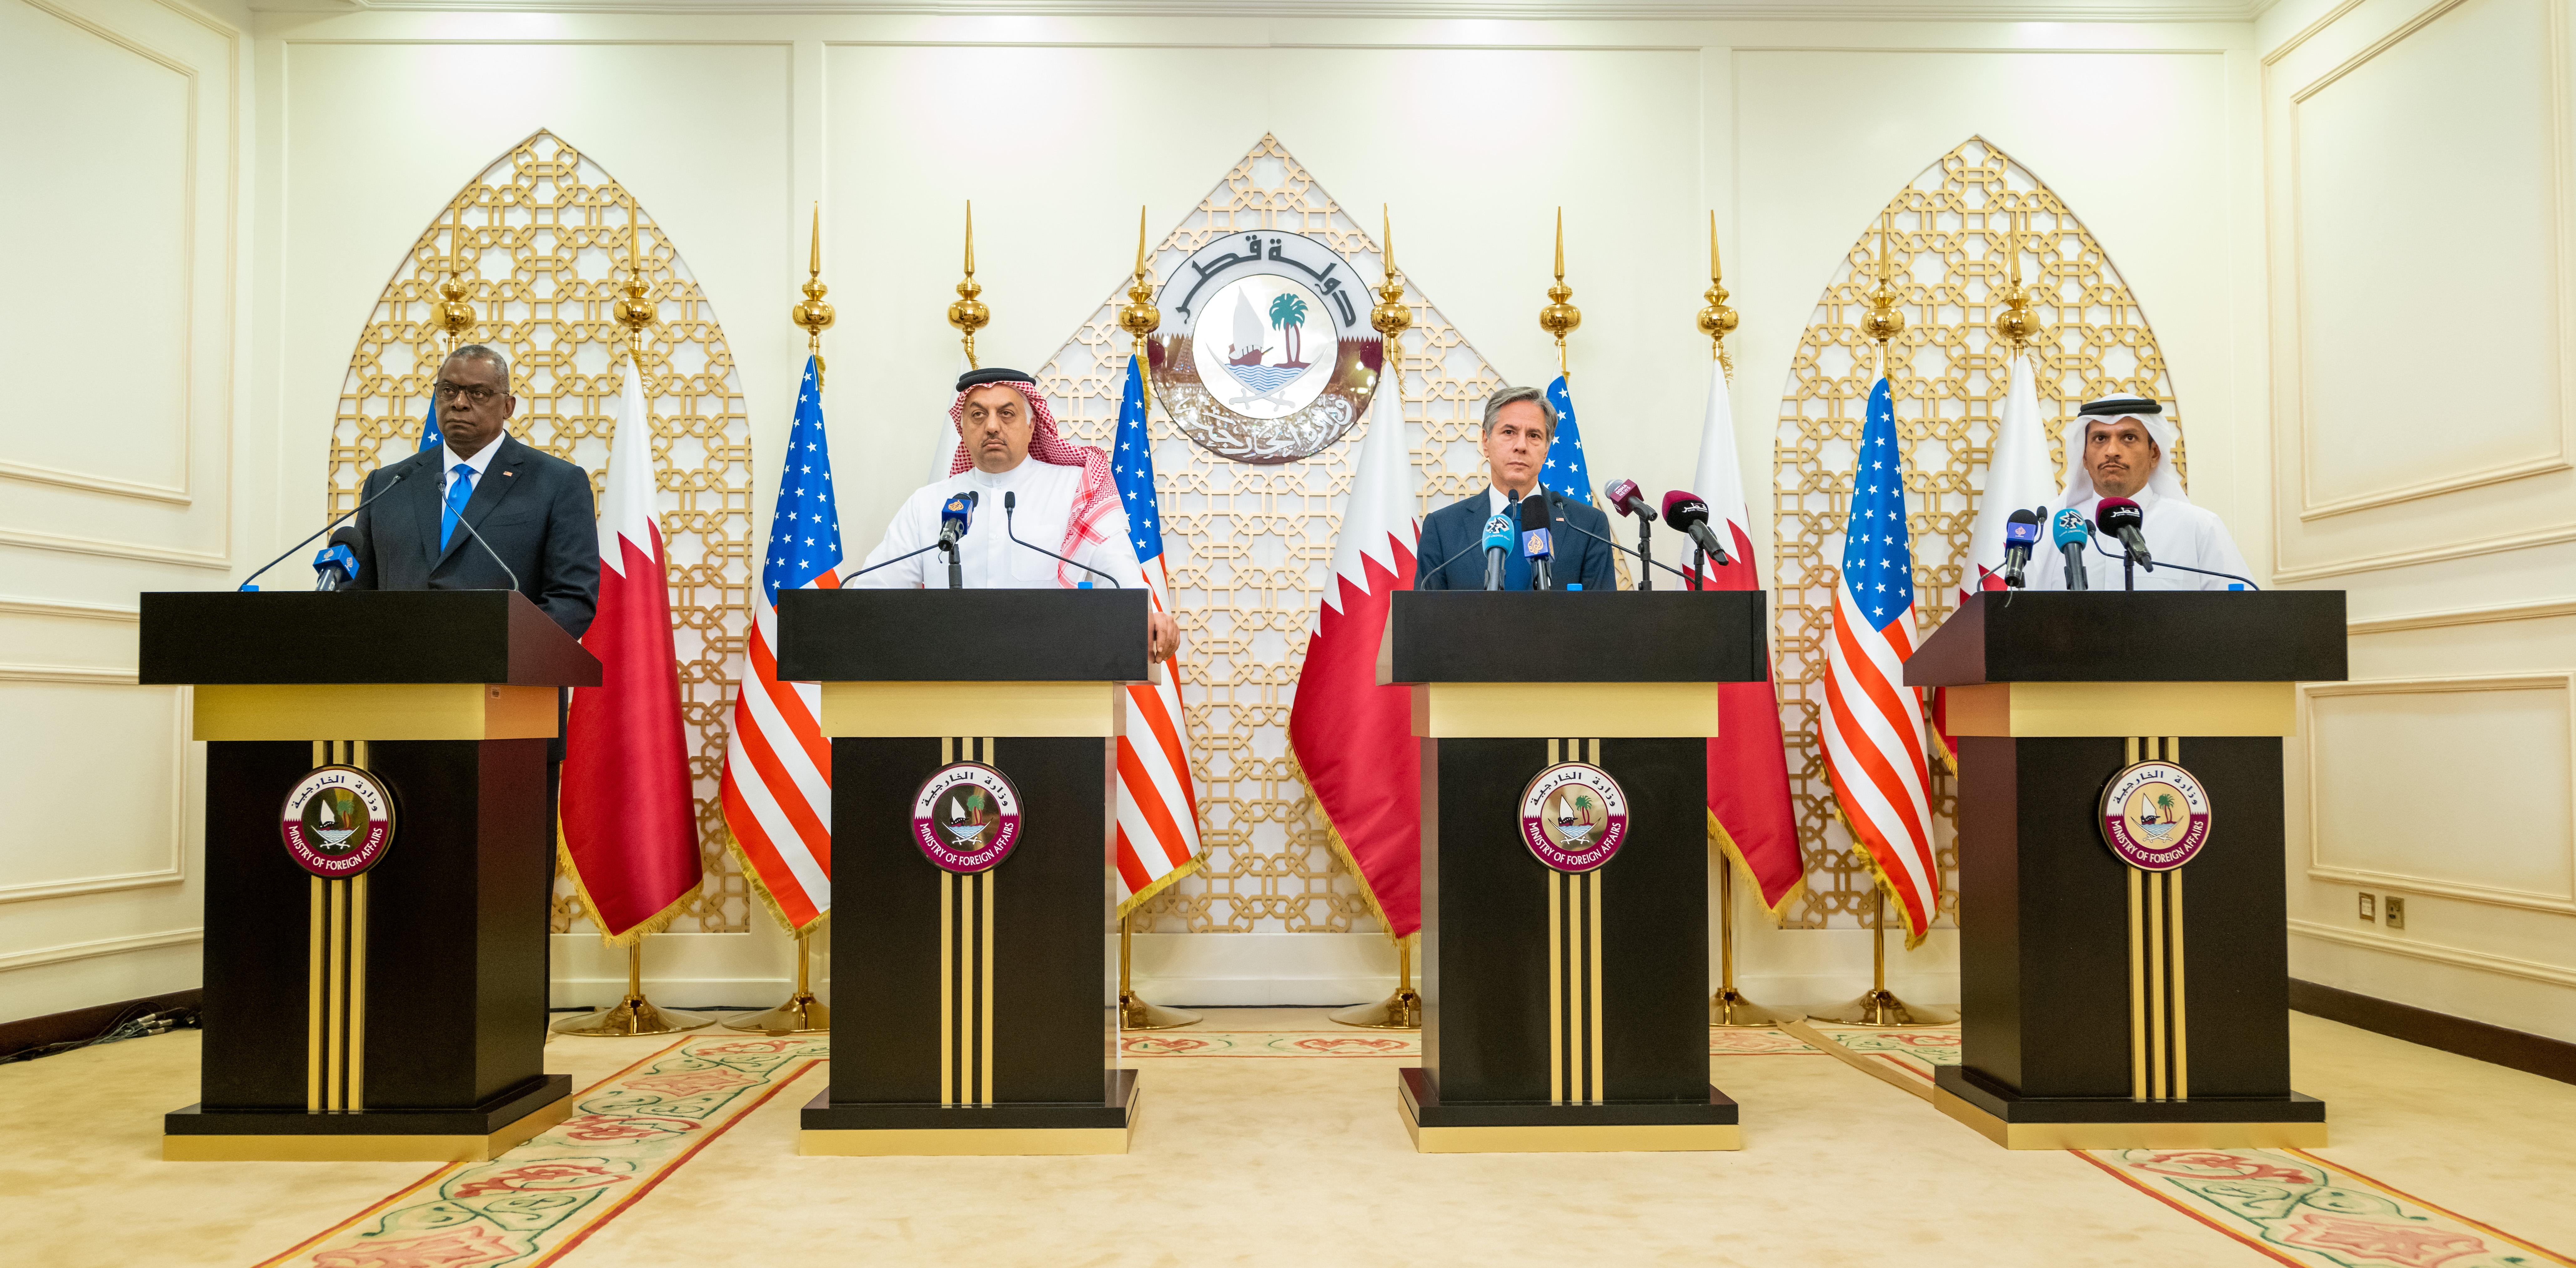 Deputy Prime Minister and Minister of State for Defense Affairs Stresses Strong Qatar-US Relations, Ongoing Coordination on Afghanistan